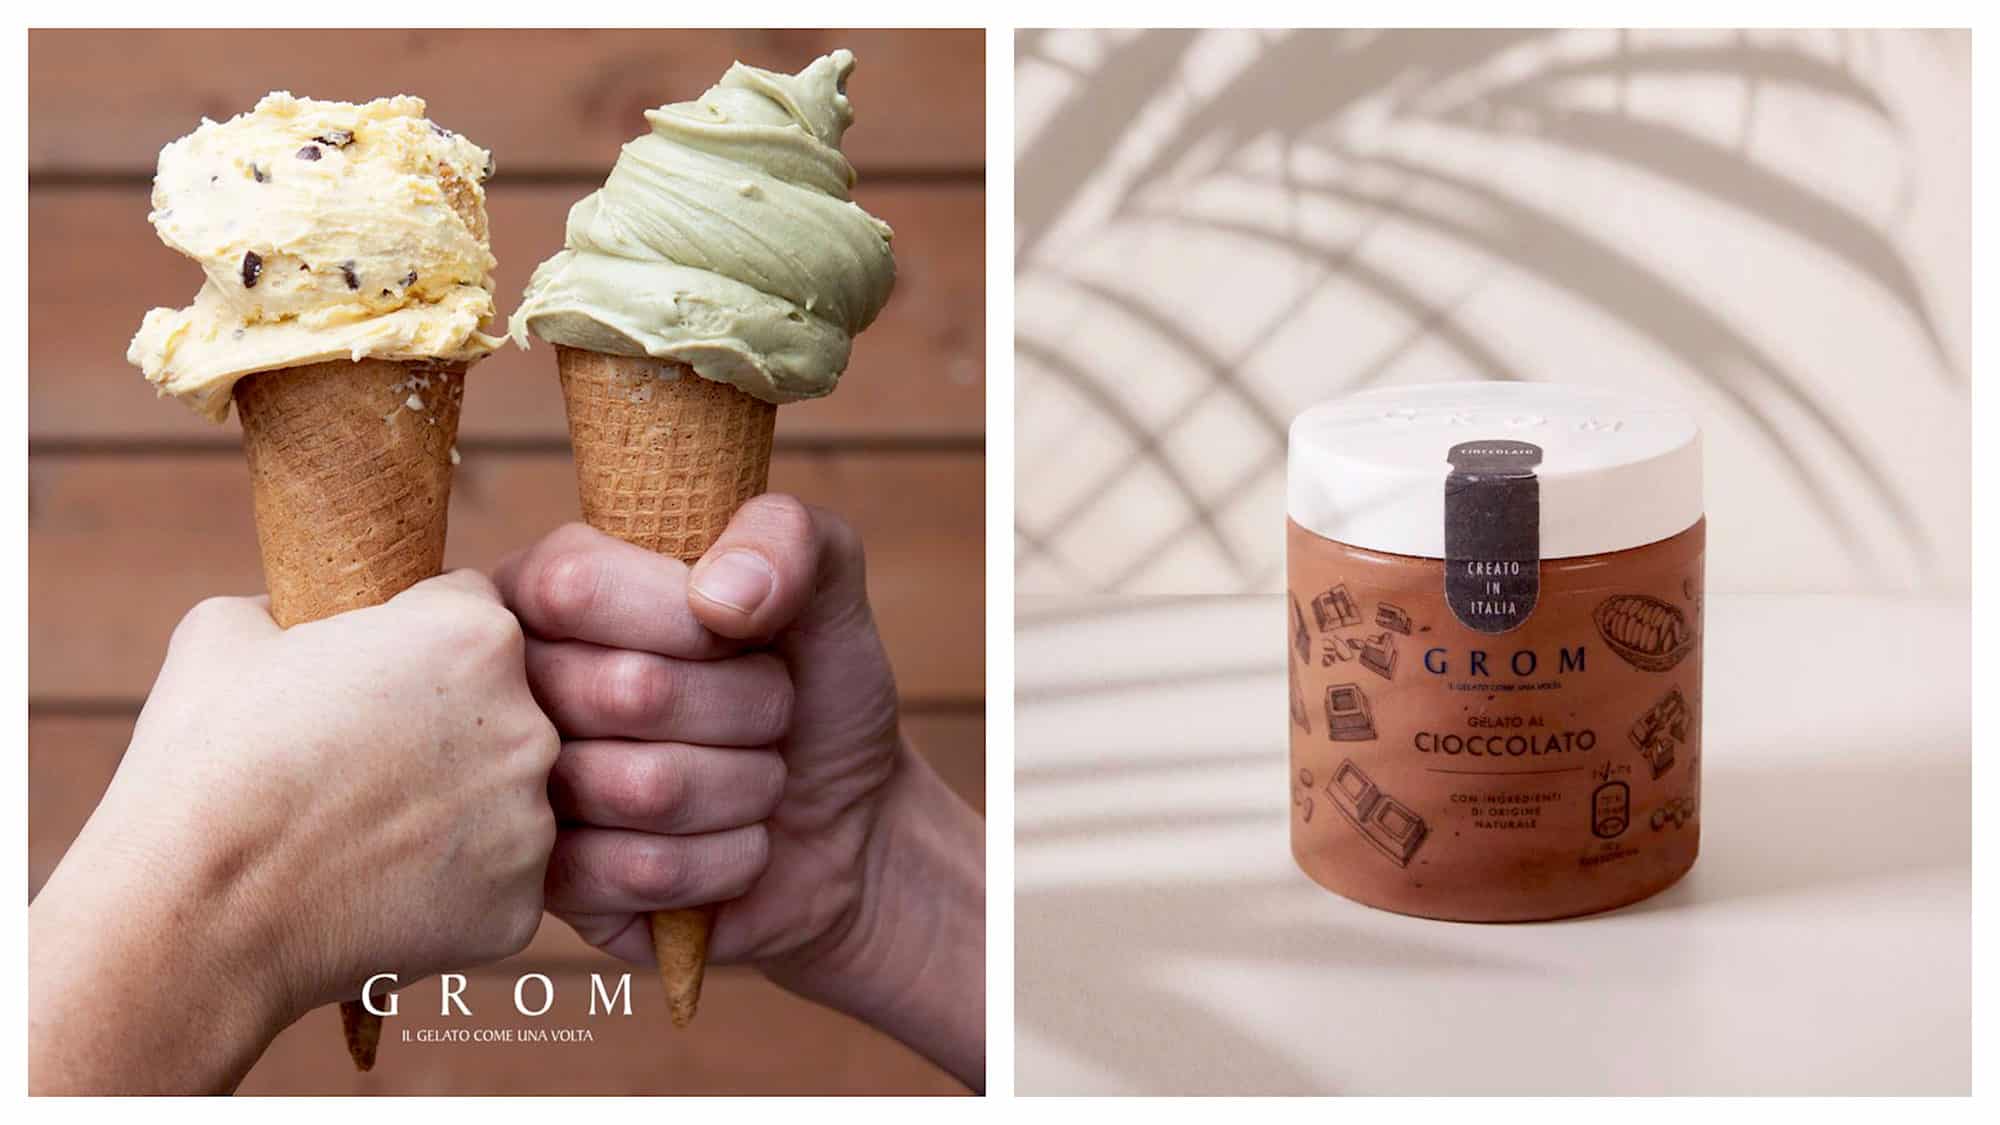 Buy gluten-free ice cream in Paris this summer at GROM, which serves generous portions of ice cream in cones (left) as well as chocolate spreads in pots to take home (right). 